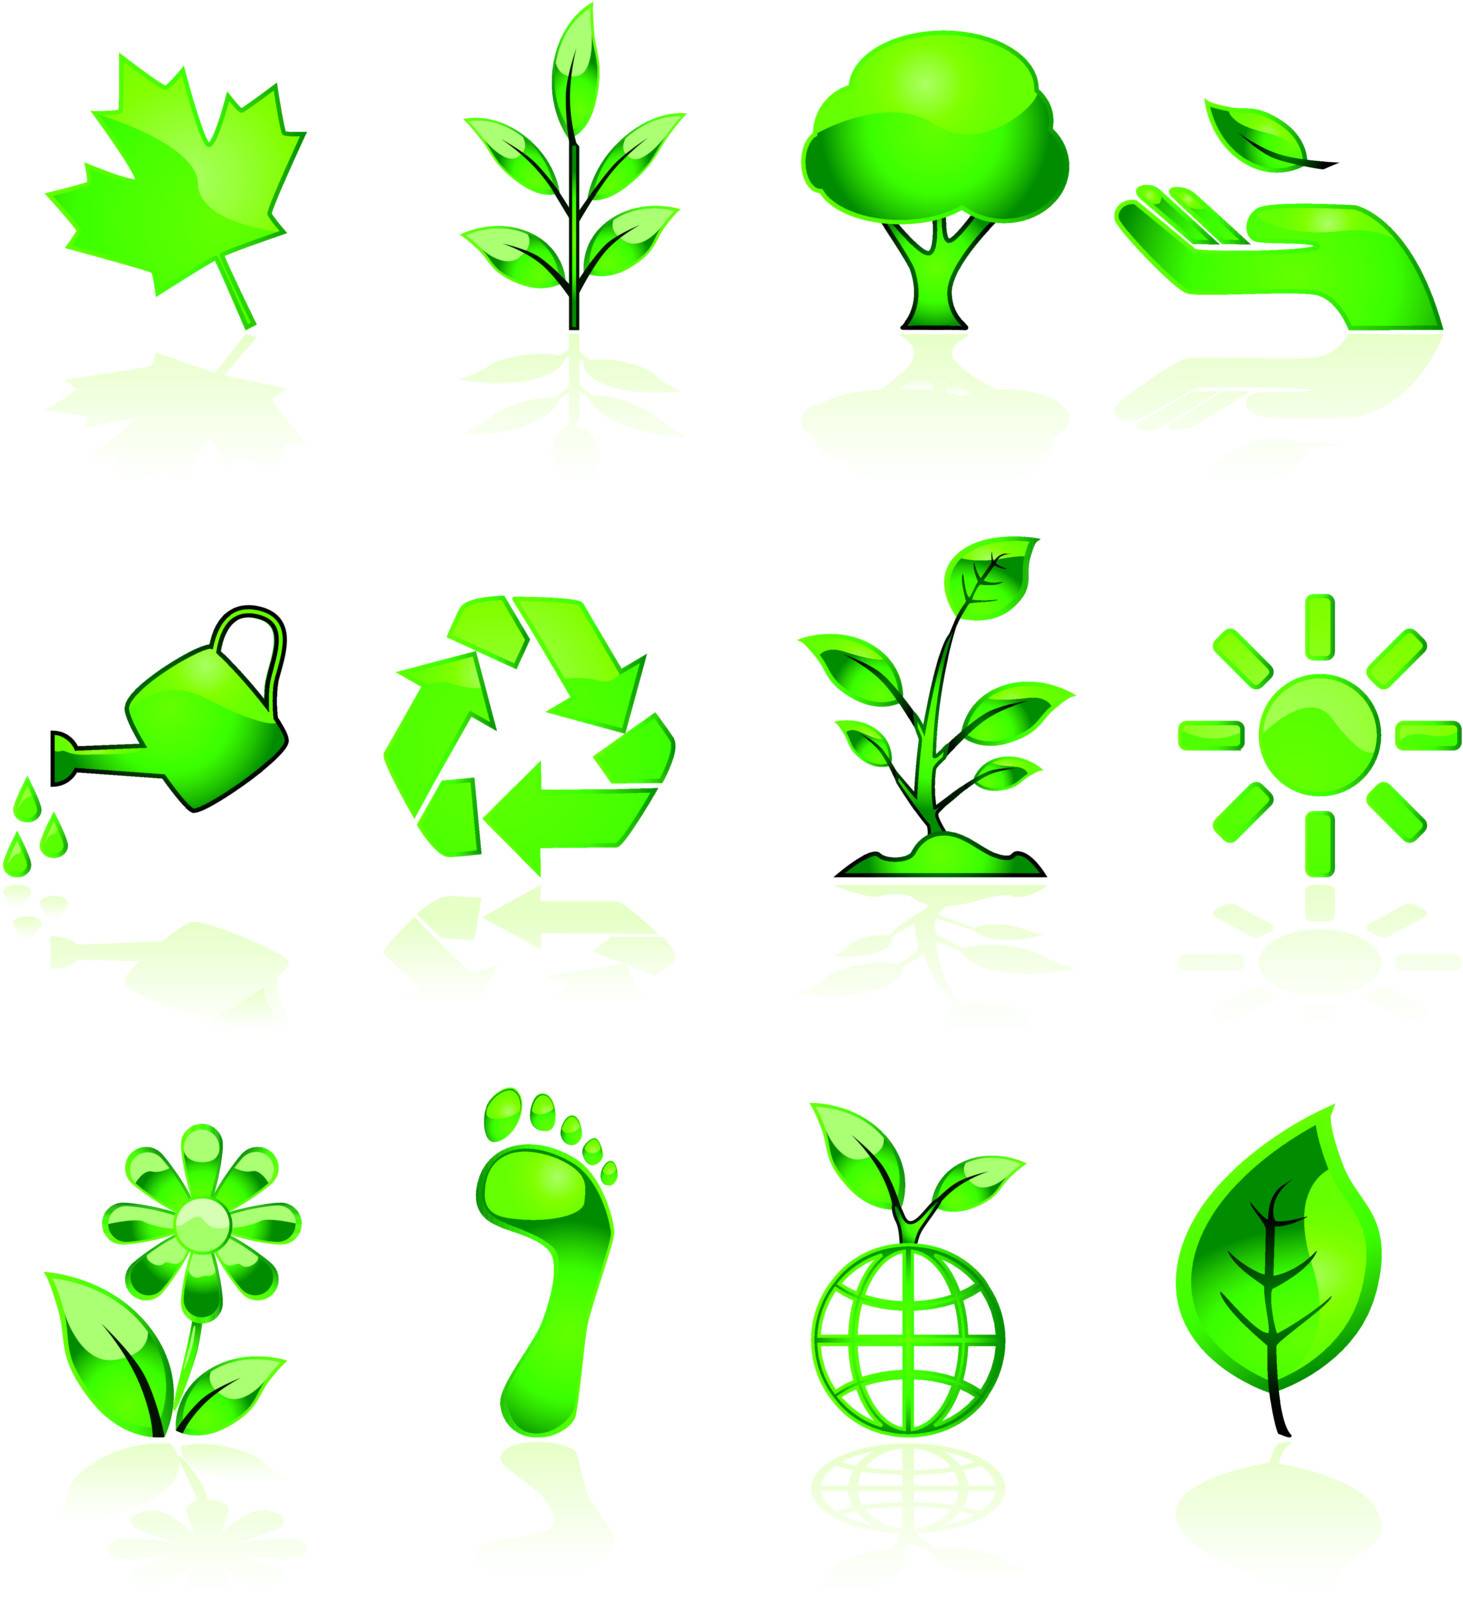 Green environmental icons by bruno1998